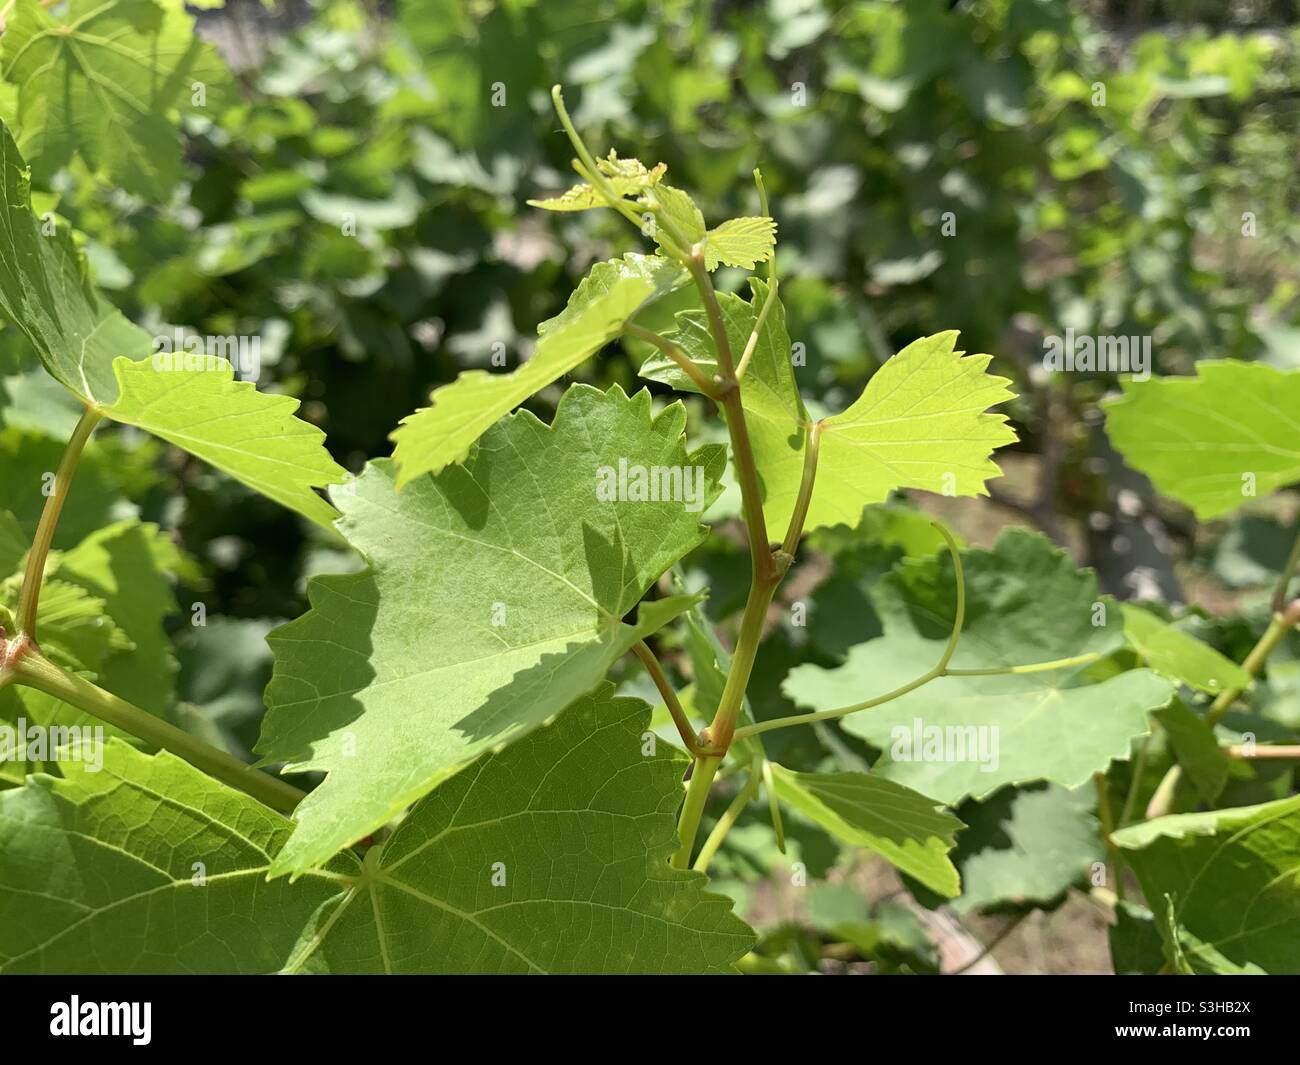 Grapes branch Stock Photo